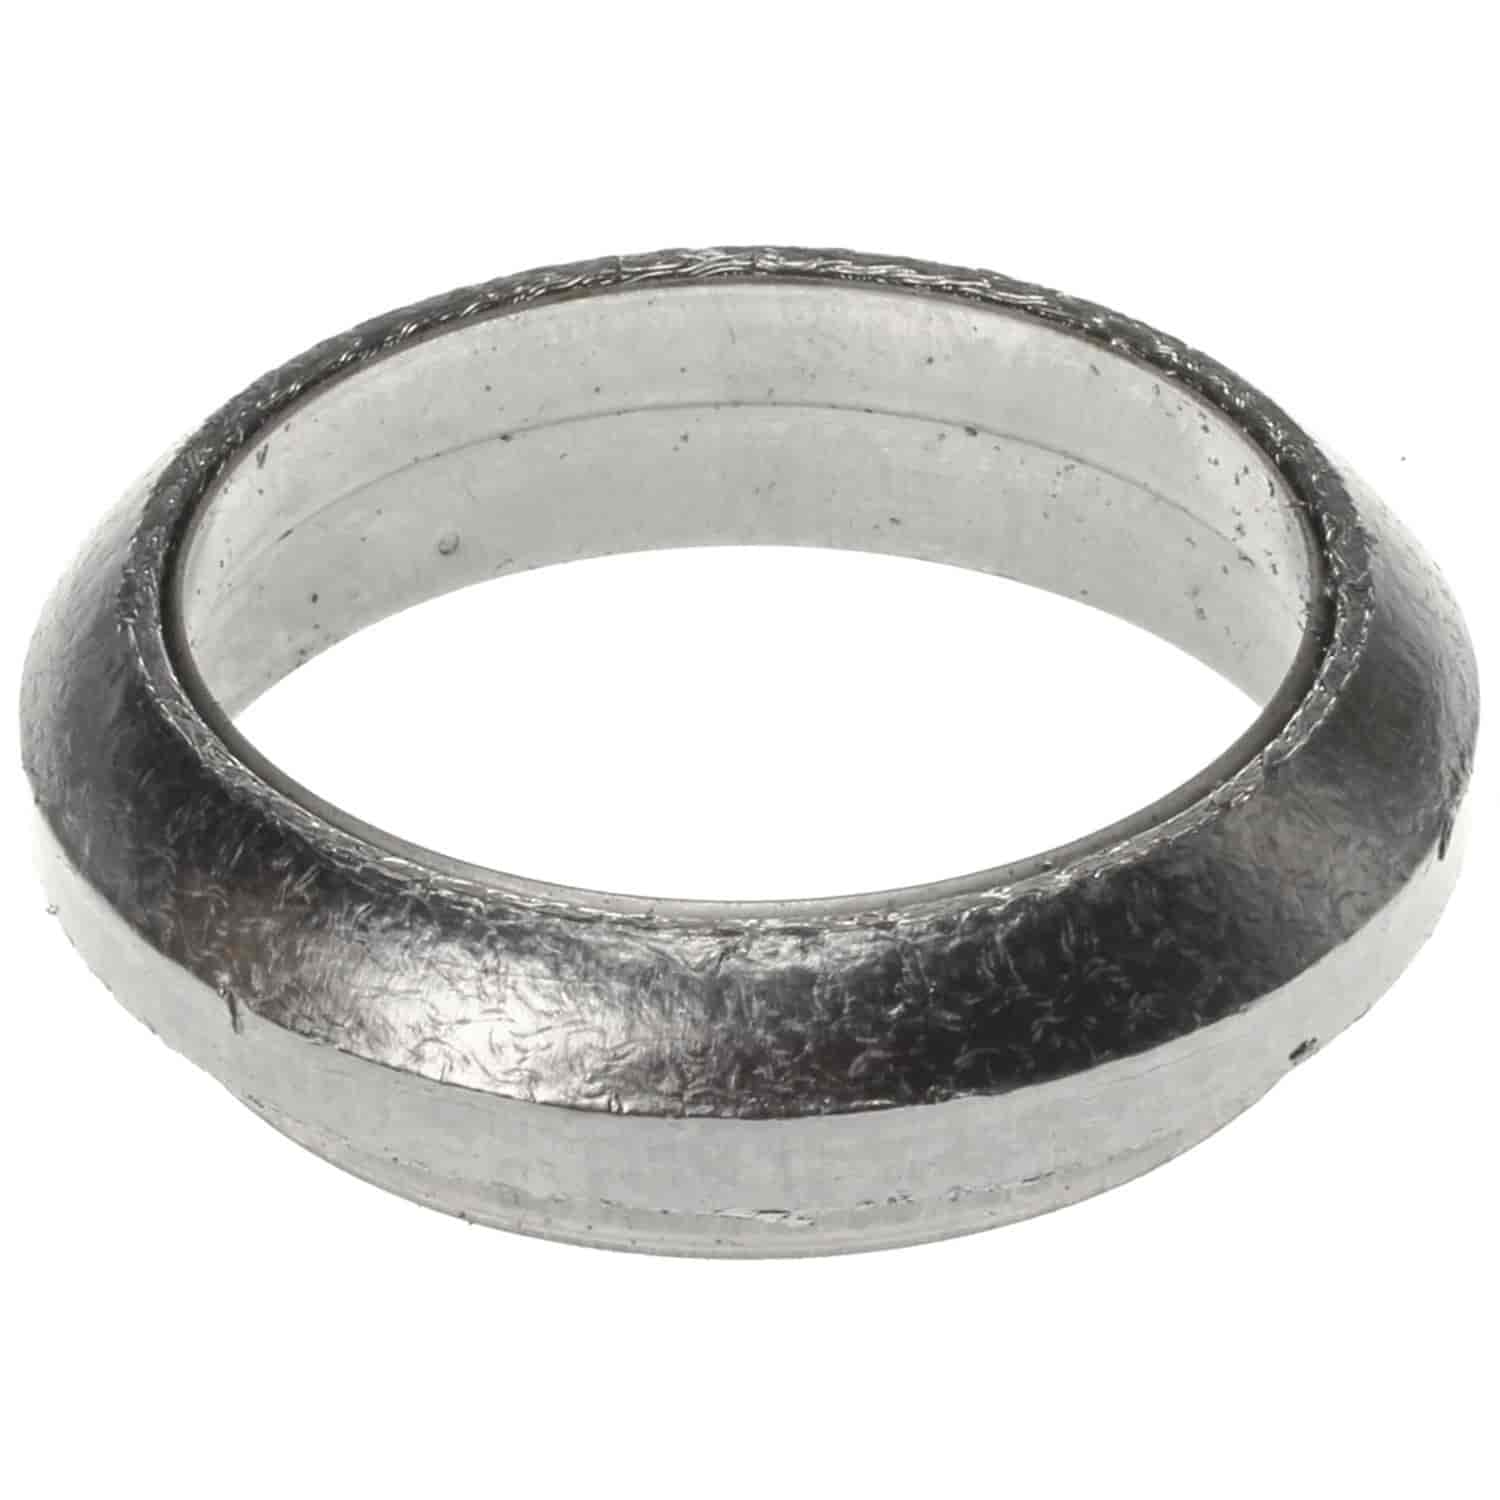 Exhaust Pipe Packing Ring Outside Diameter: 2.778"